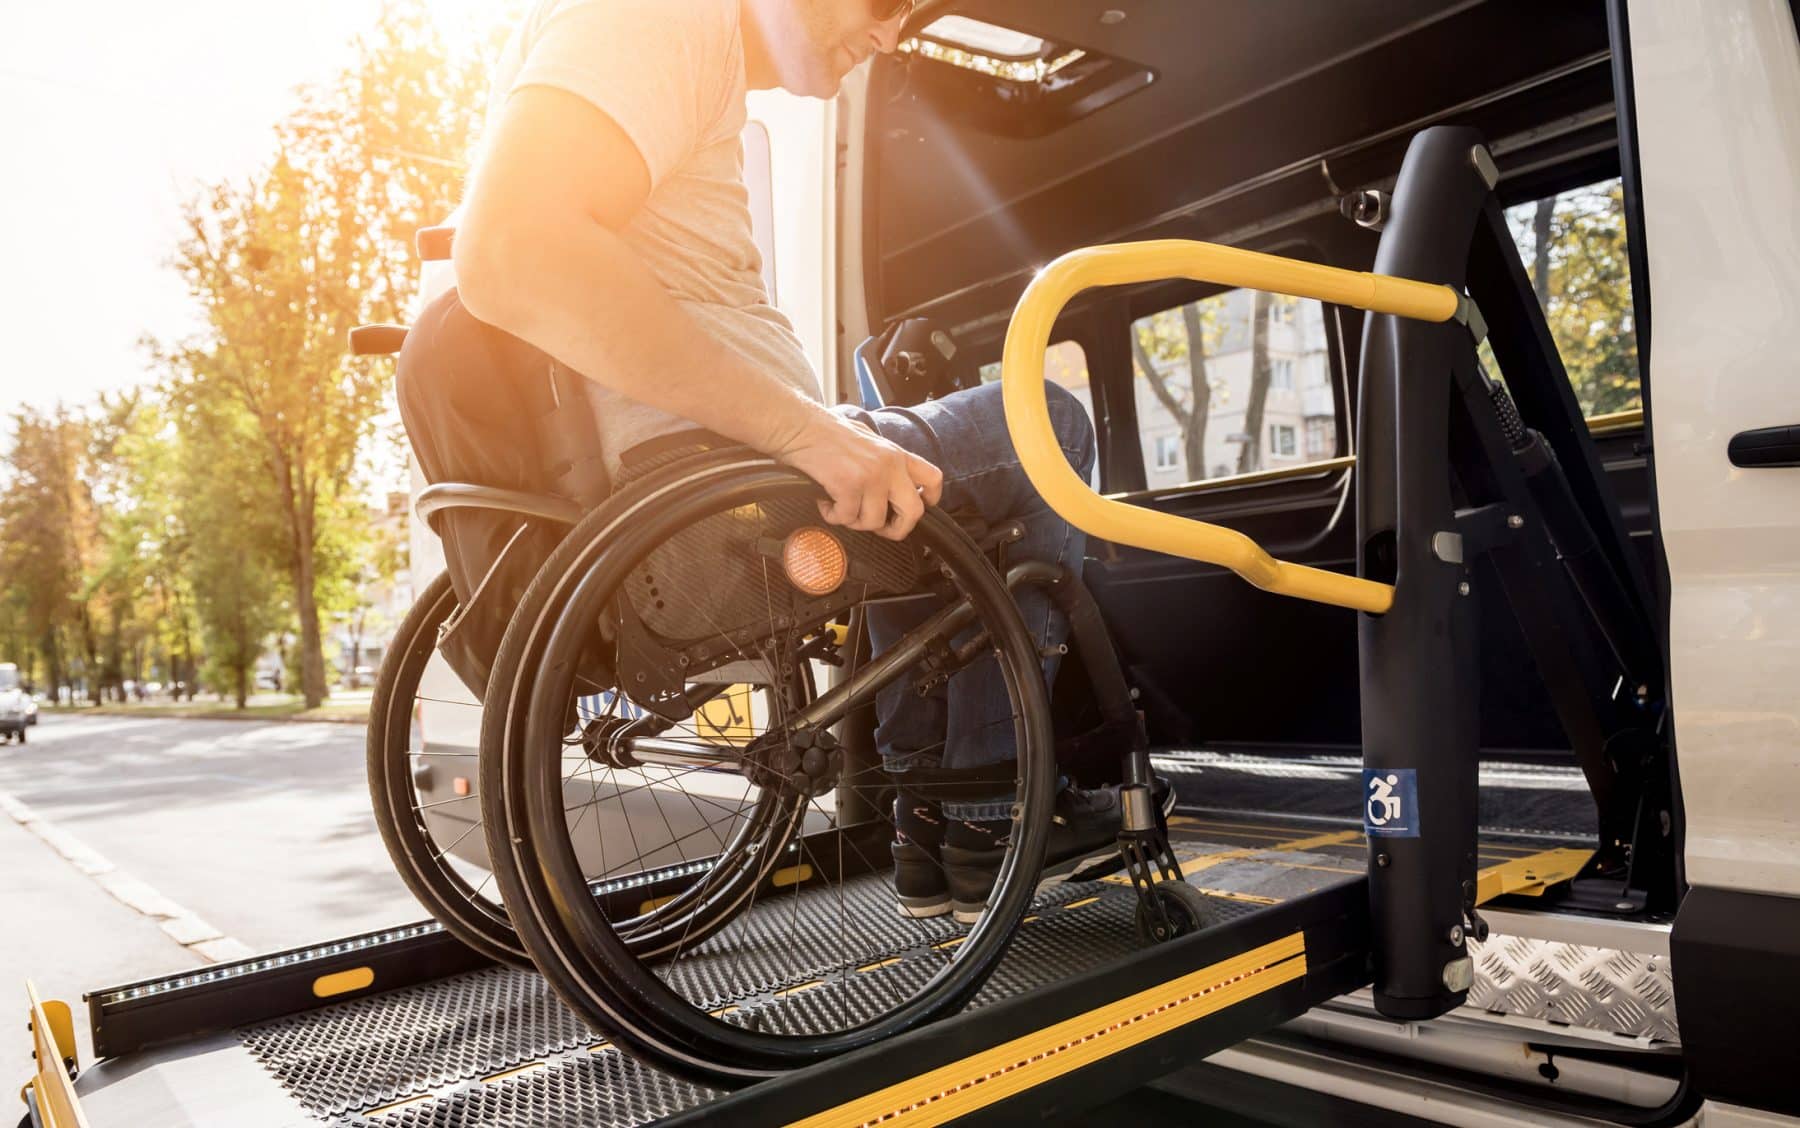 A man in a wheelchair getting on a bus in Los Angeles.